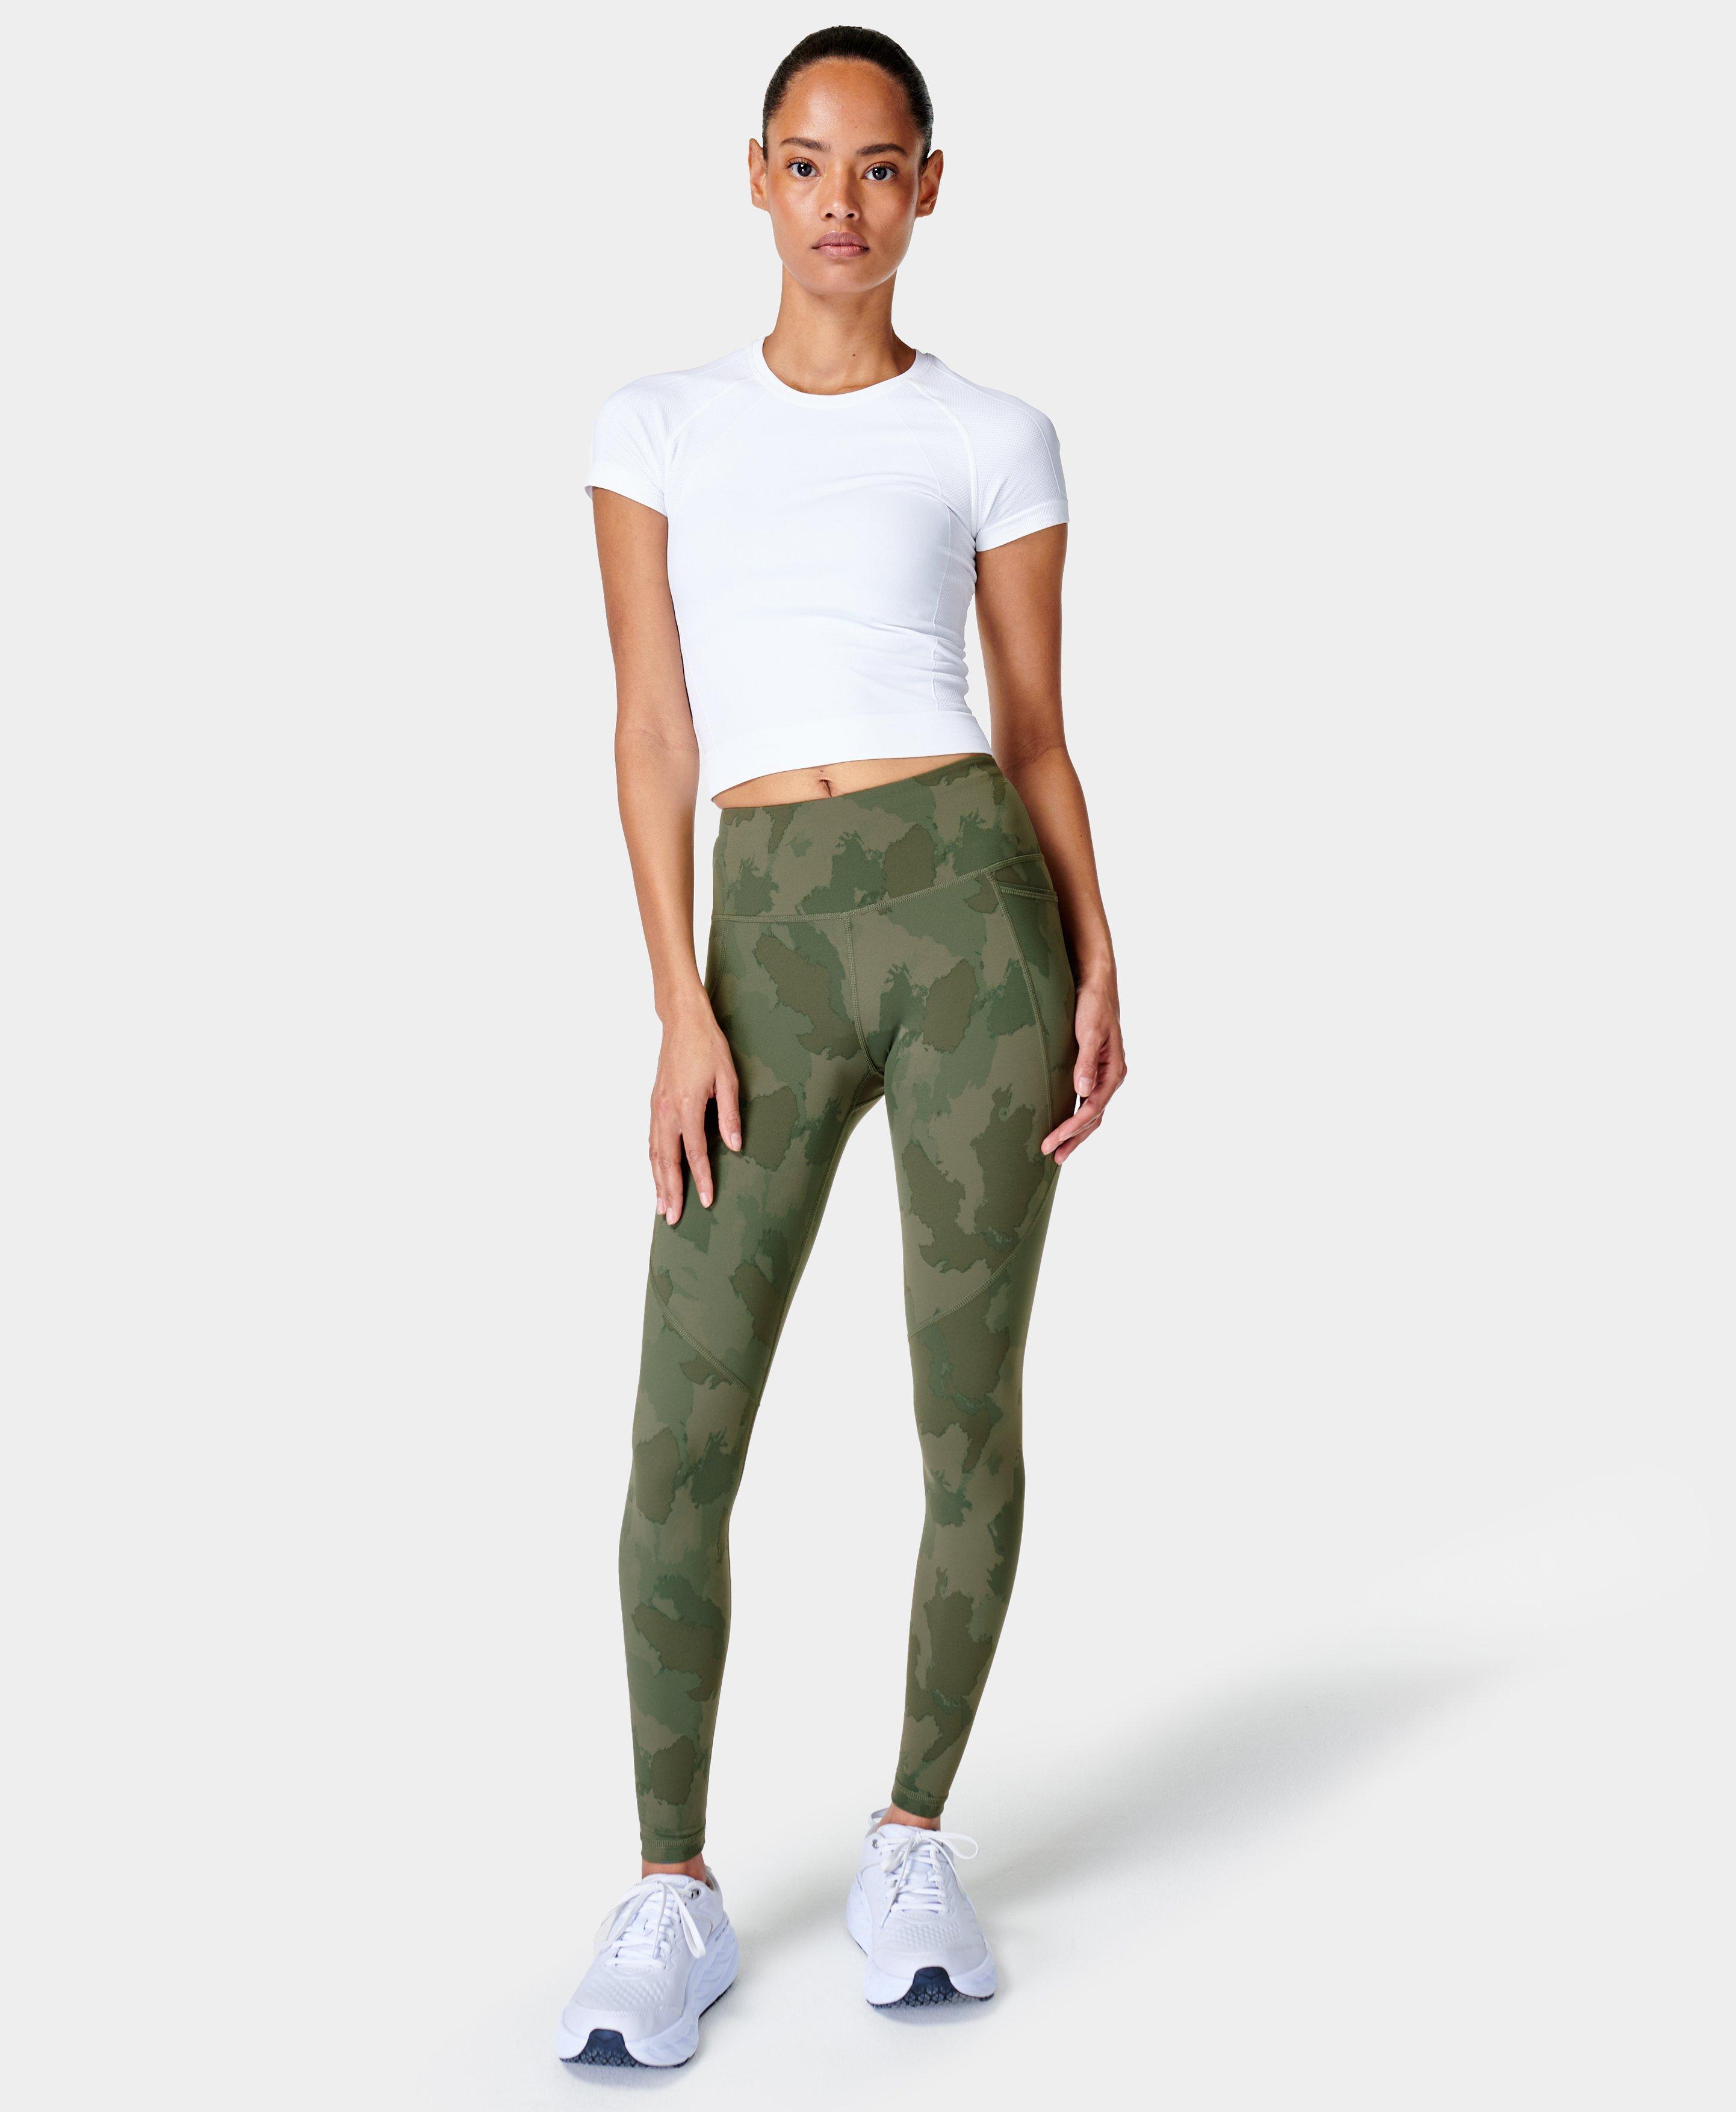 Power 7/8 Workout Leggings Sb5400a 78 Green-Painted-Camo-P – RUE MADAME